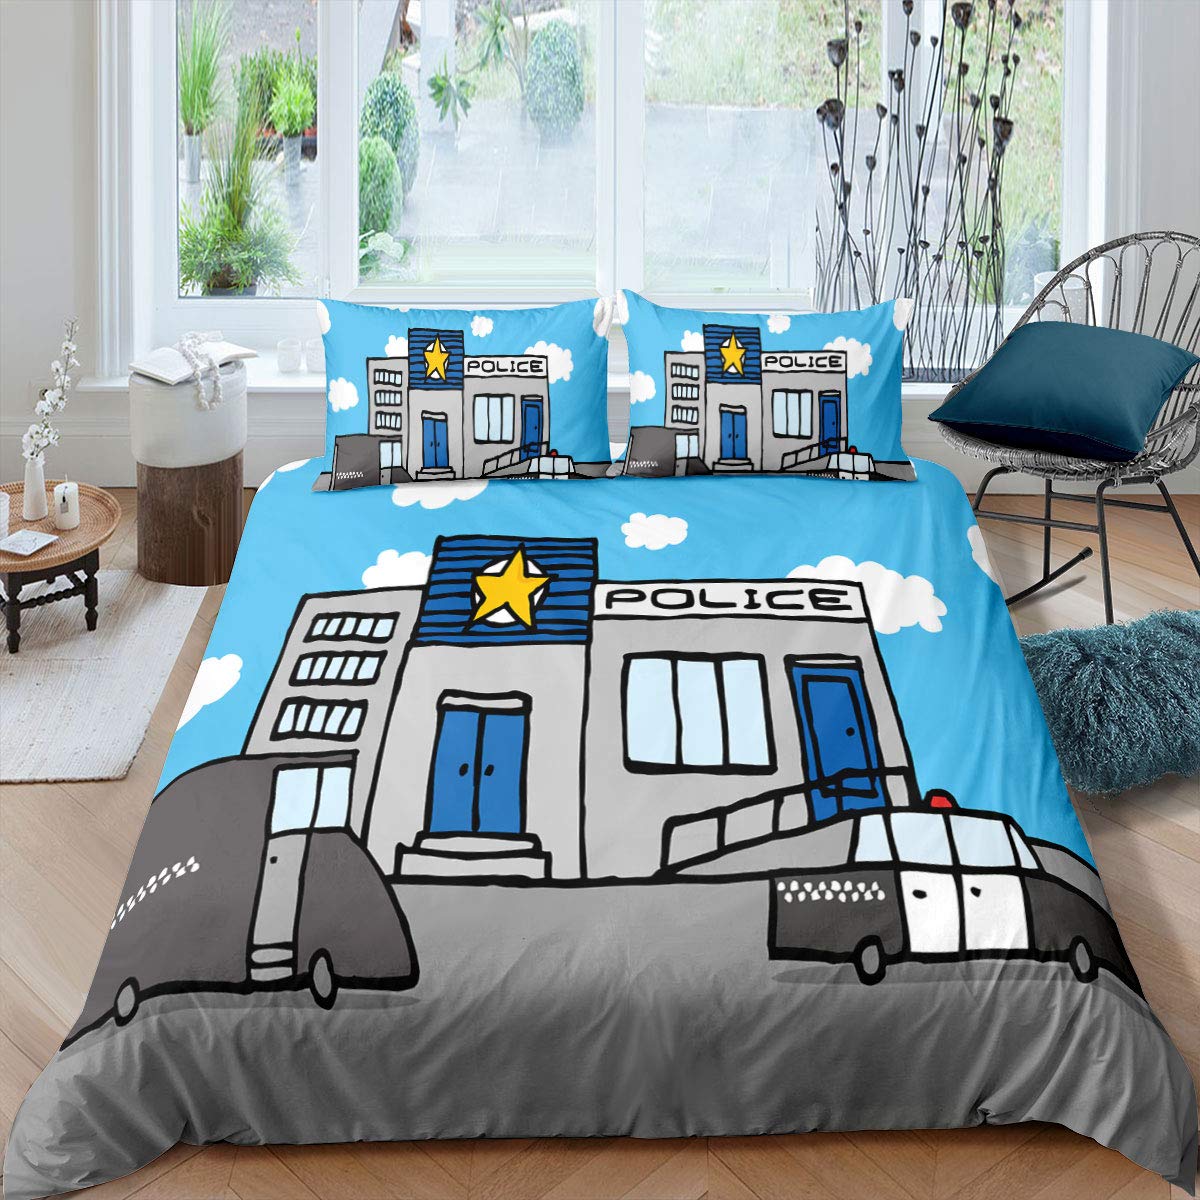 Police printed duvet cover